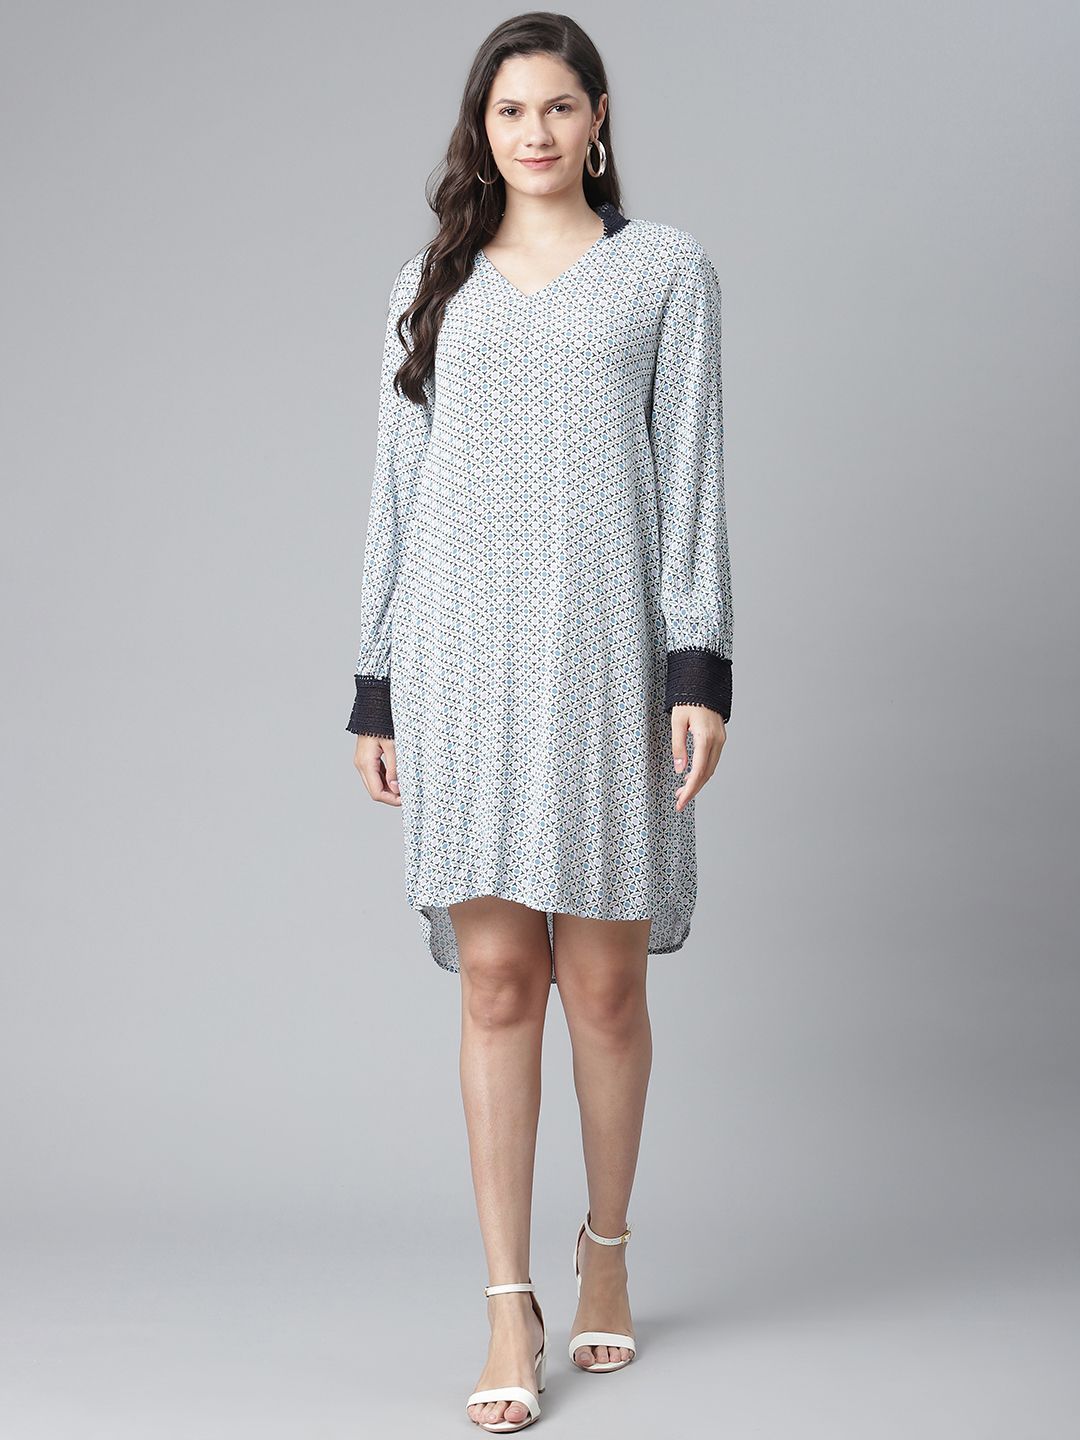 Marks & Spencer Blue Printed Shift Dress Price in India